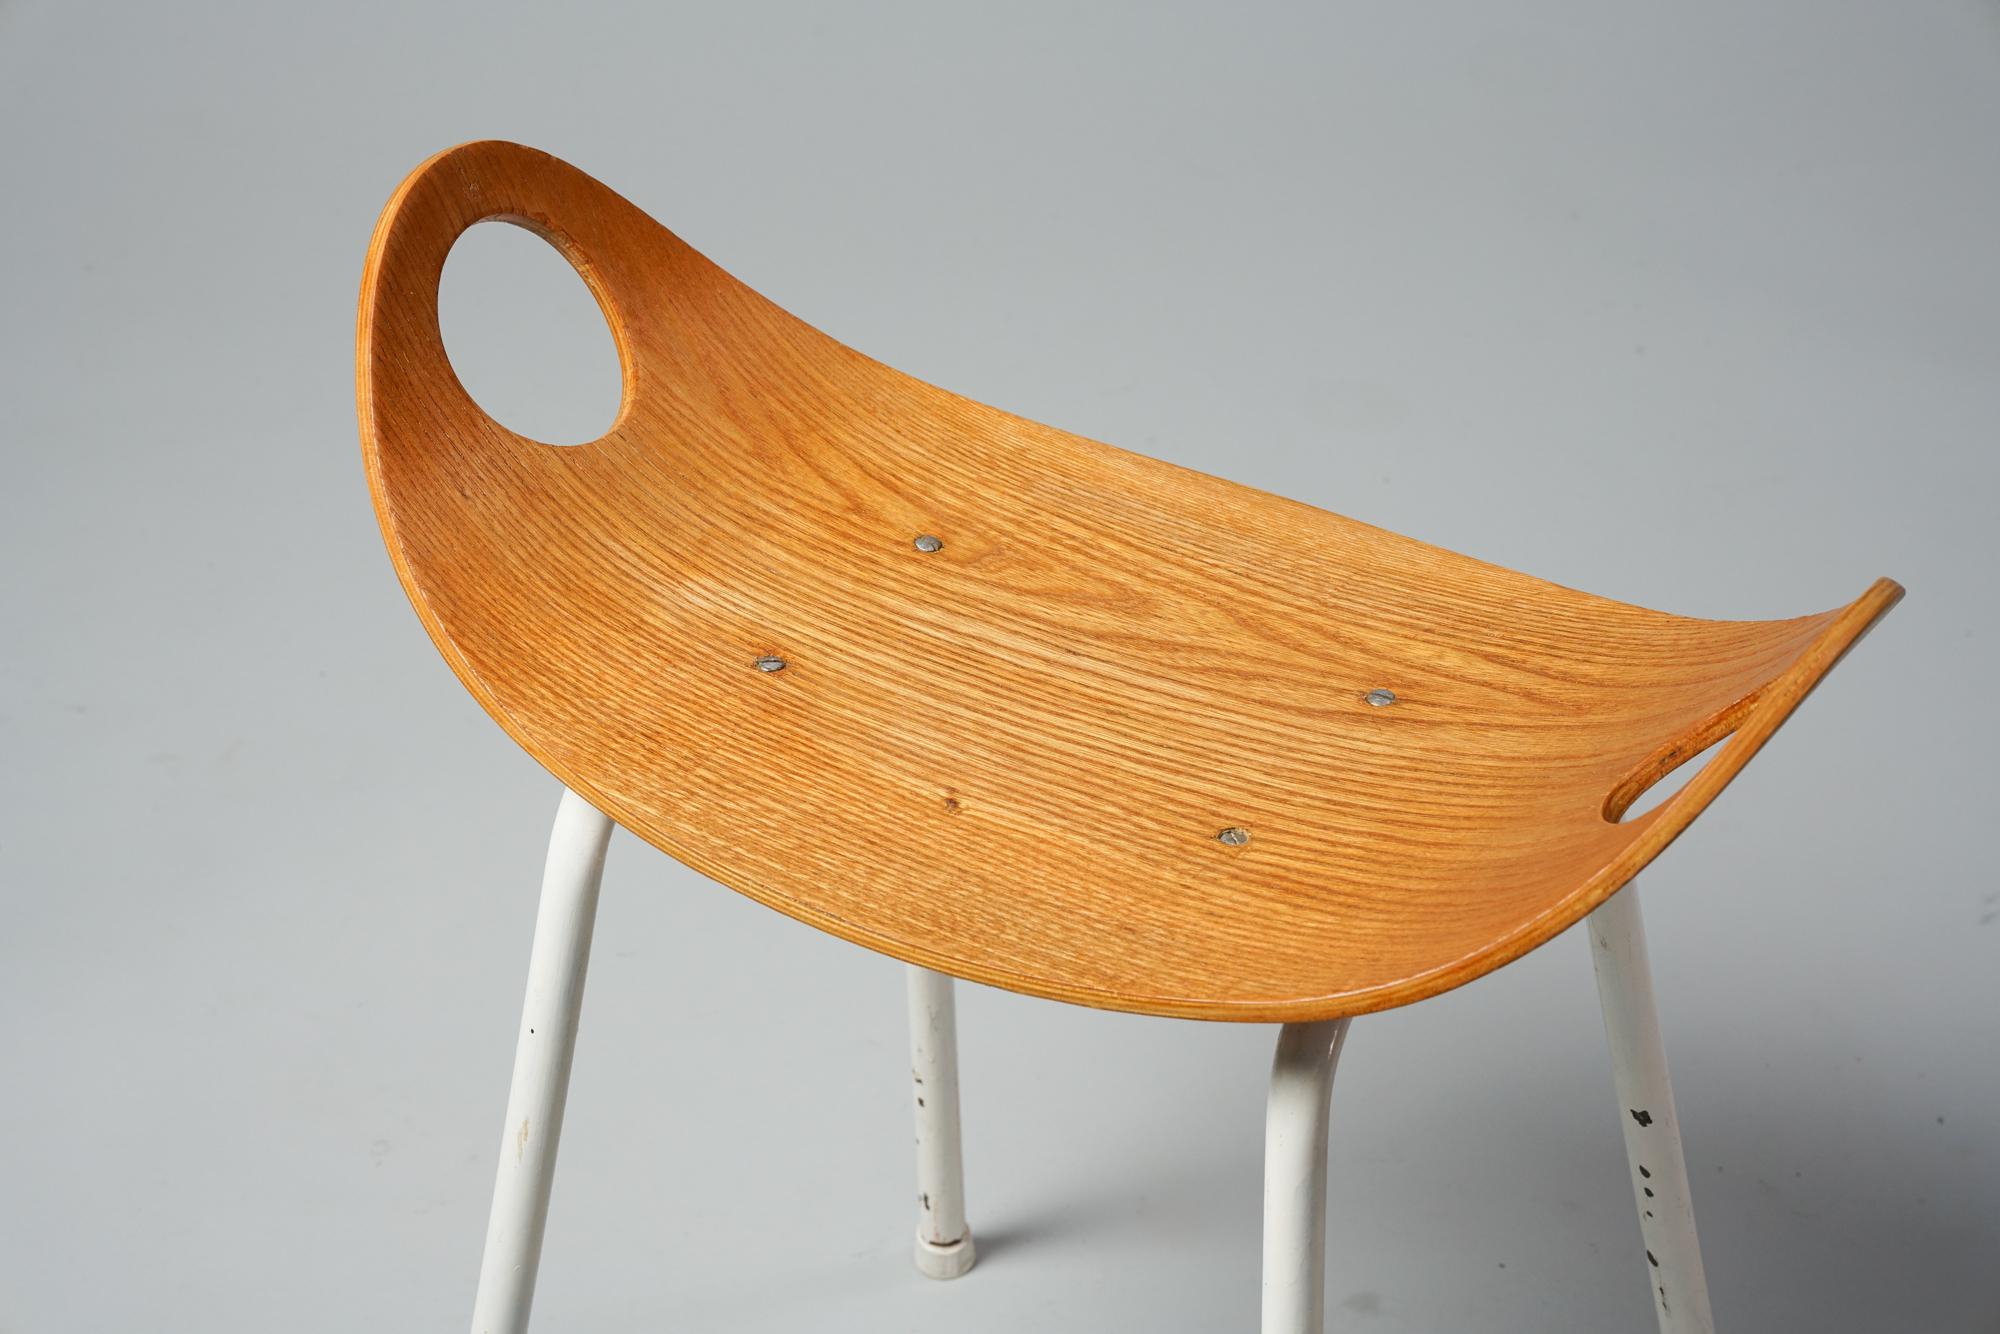 Mid-Century Modern Scandinavian stool designed by Olof Kettunen for J.Merivaara Oy, 1950s, bend plywood, metal frame, beautiful Minimalist design, good original condition, minor wear consistent with age and use. 

Ola Kettunen, better known as